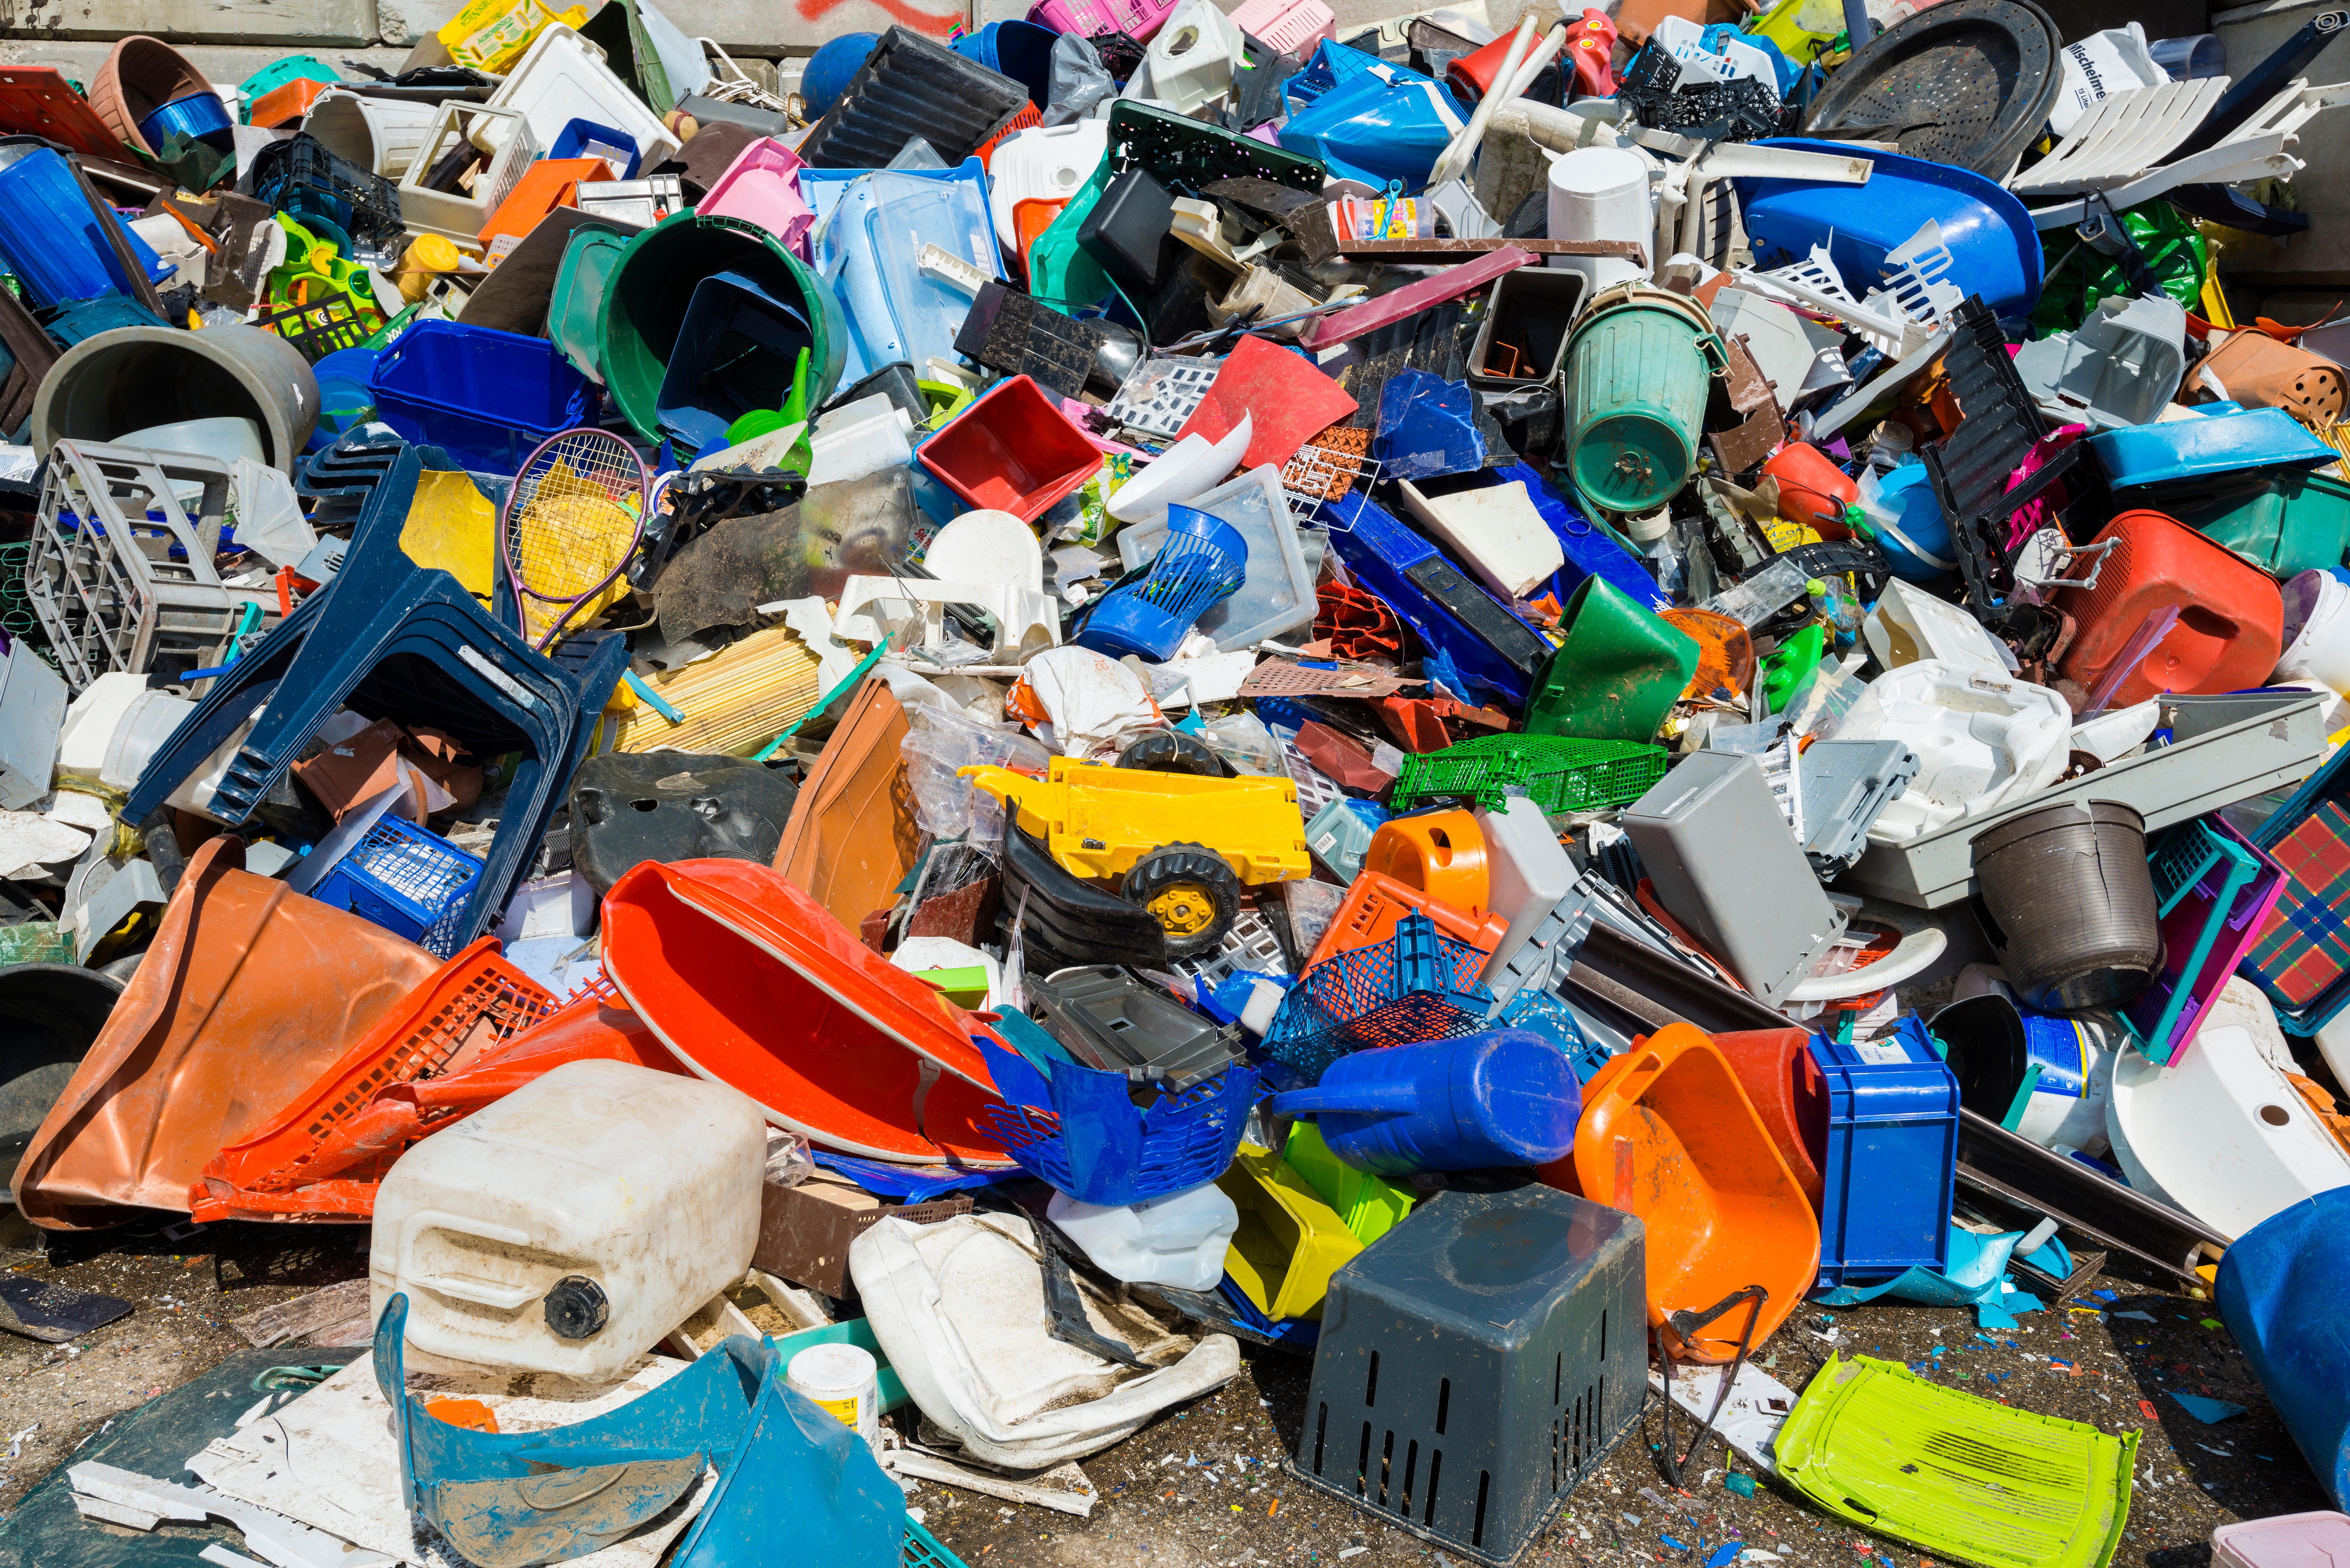 The Canadian rubbish had been falsely labelled as plastics for recycling. Photo: Alamy